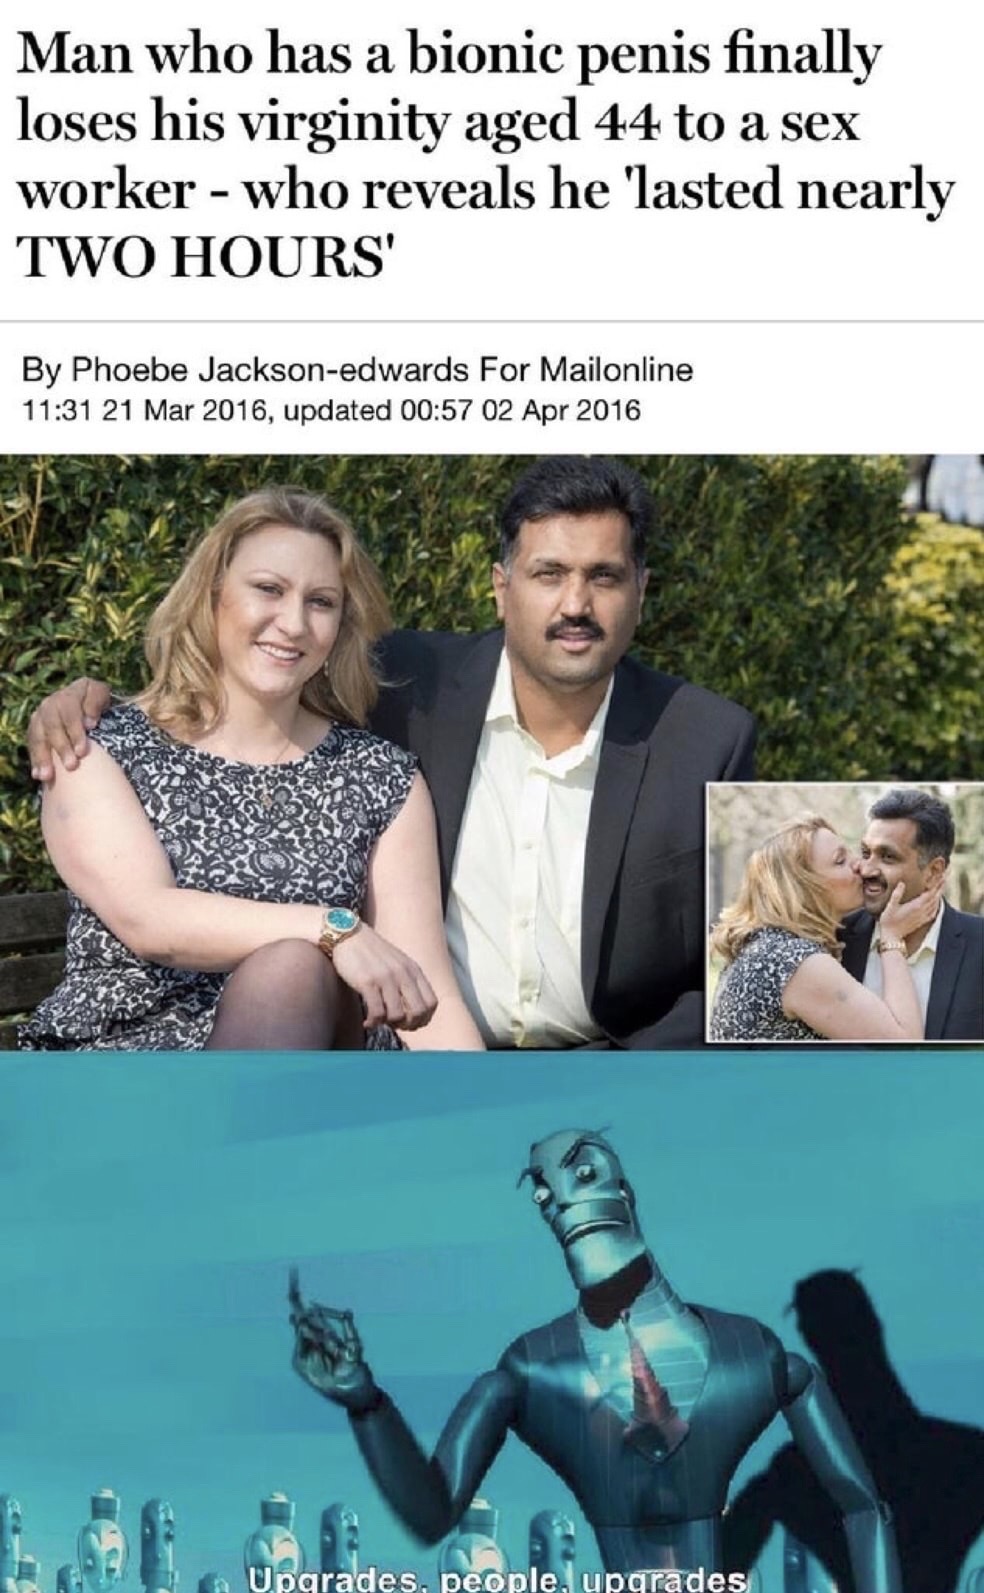 Bigweld - Man who has a bionic penis finally loses his virginity aged 44 to a sex worker who reveals he 'lasted nearly Two Hours' By Phoebe Jacksonedwards For Mailonline , updated Upgrades. people, upgrades